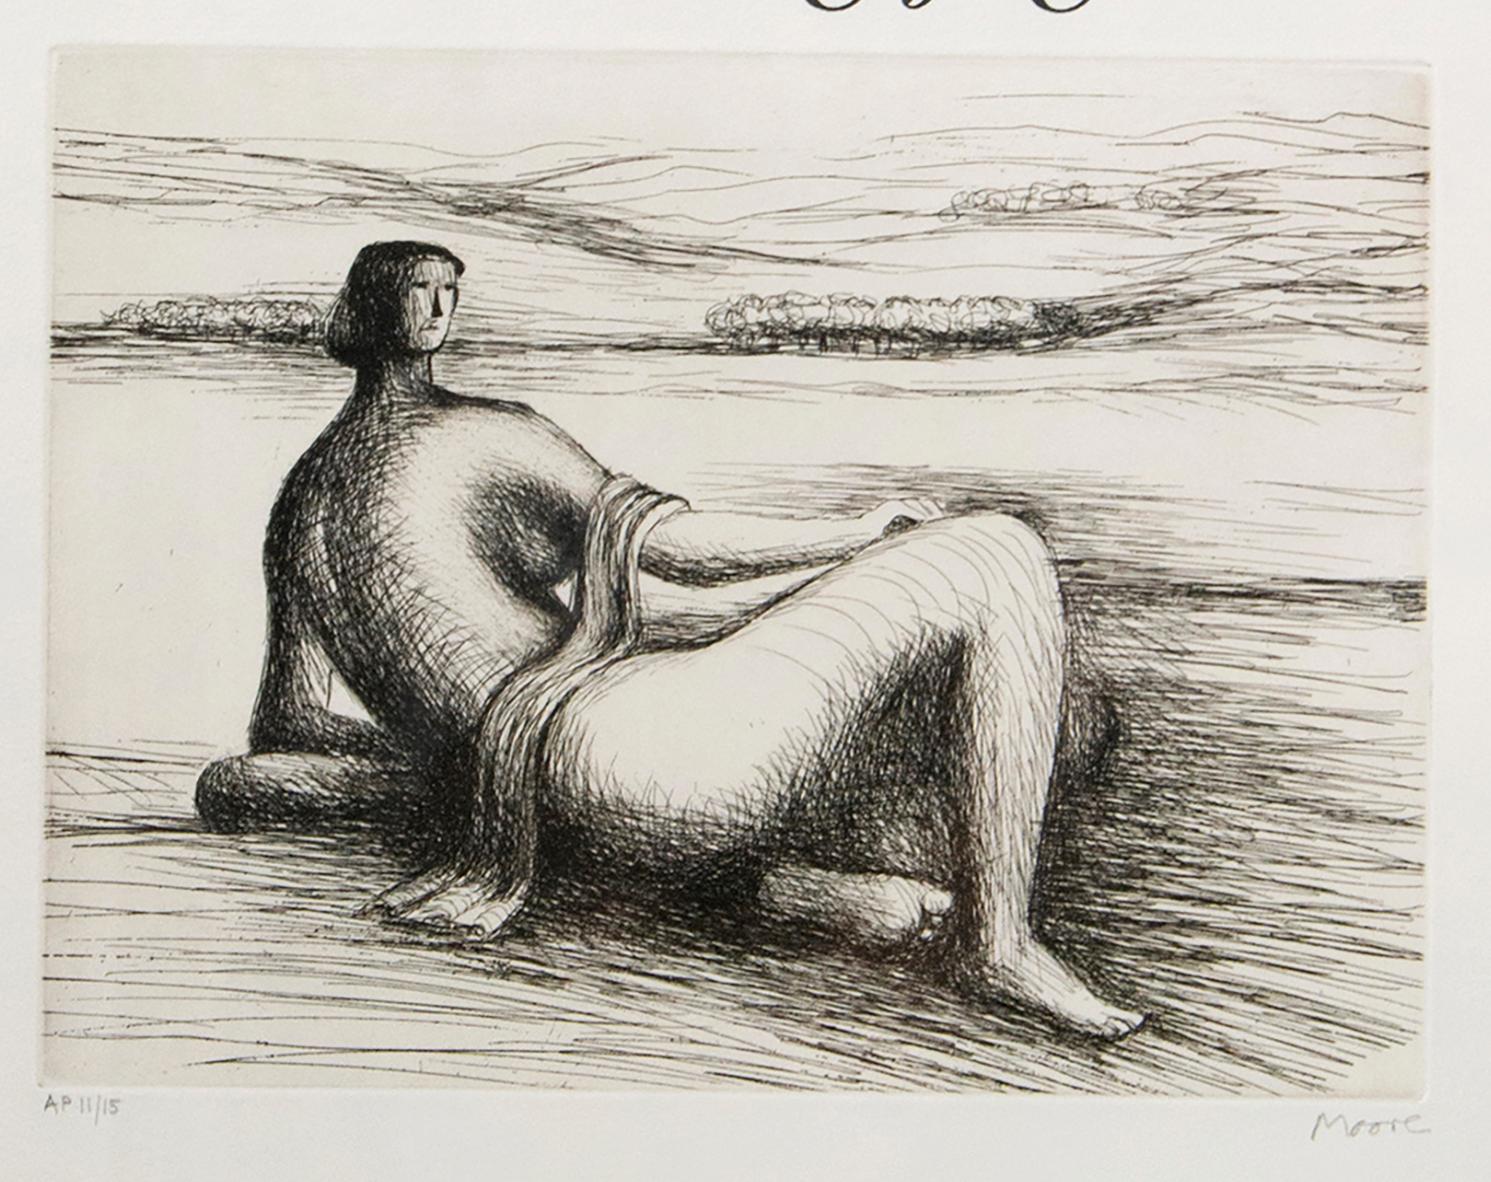 Etching, 1977, signed in pencil and numbered AP aside from the edition of 25, published by Henry Moore, Much Hadham, 57.5 x 48.5 cm. (22.6 x 19 in.)